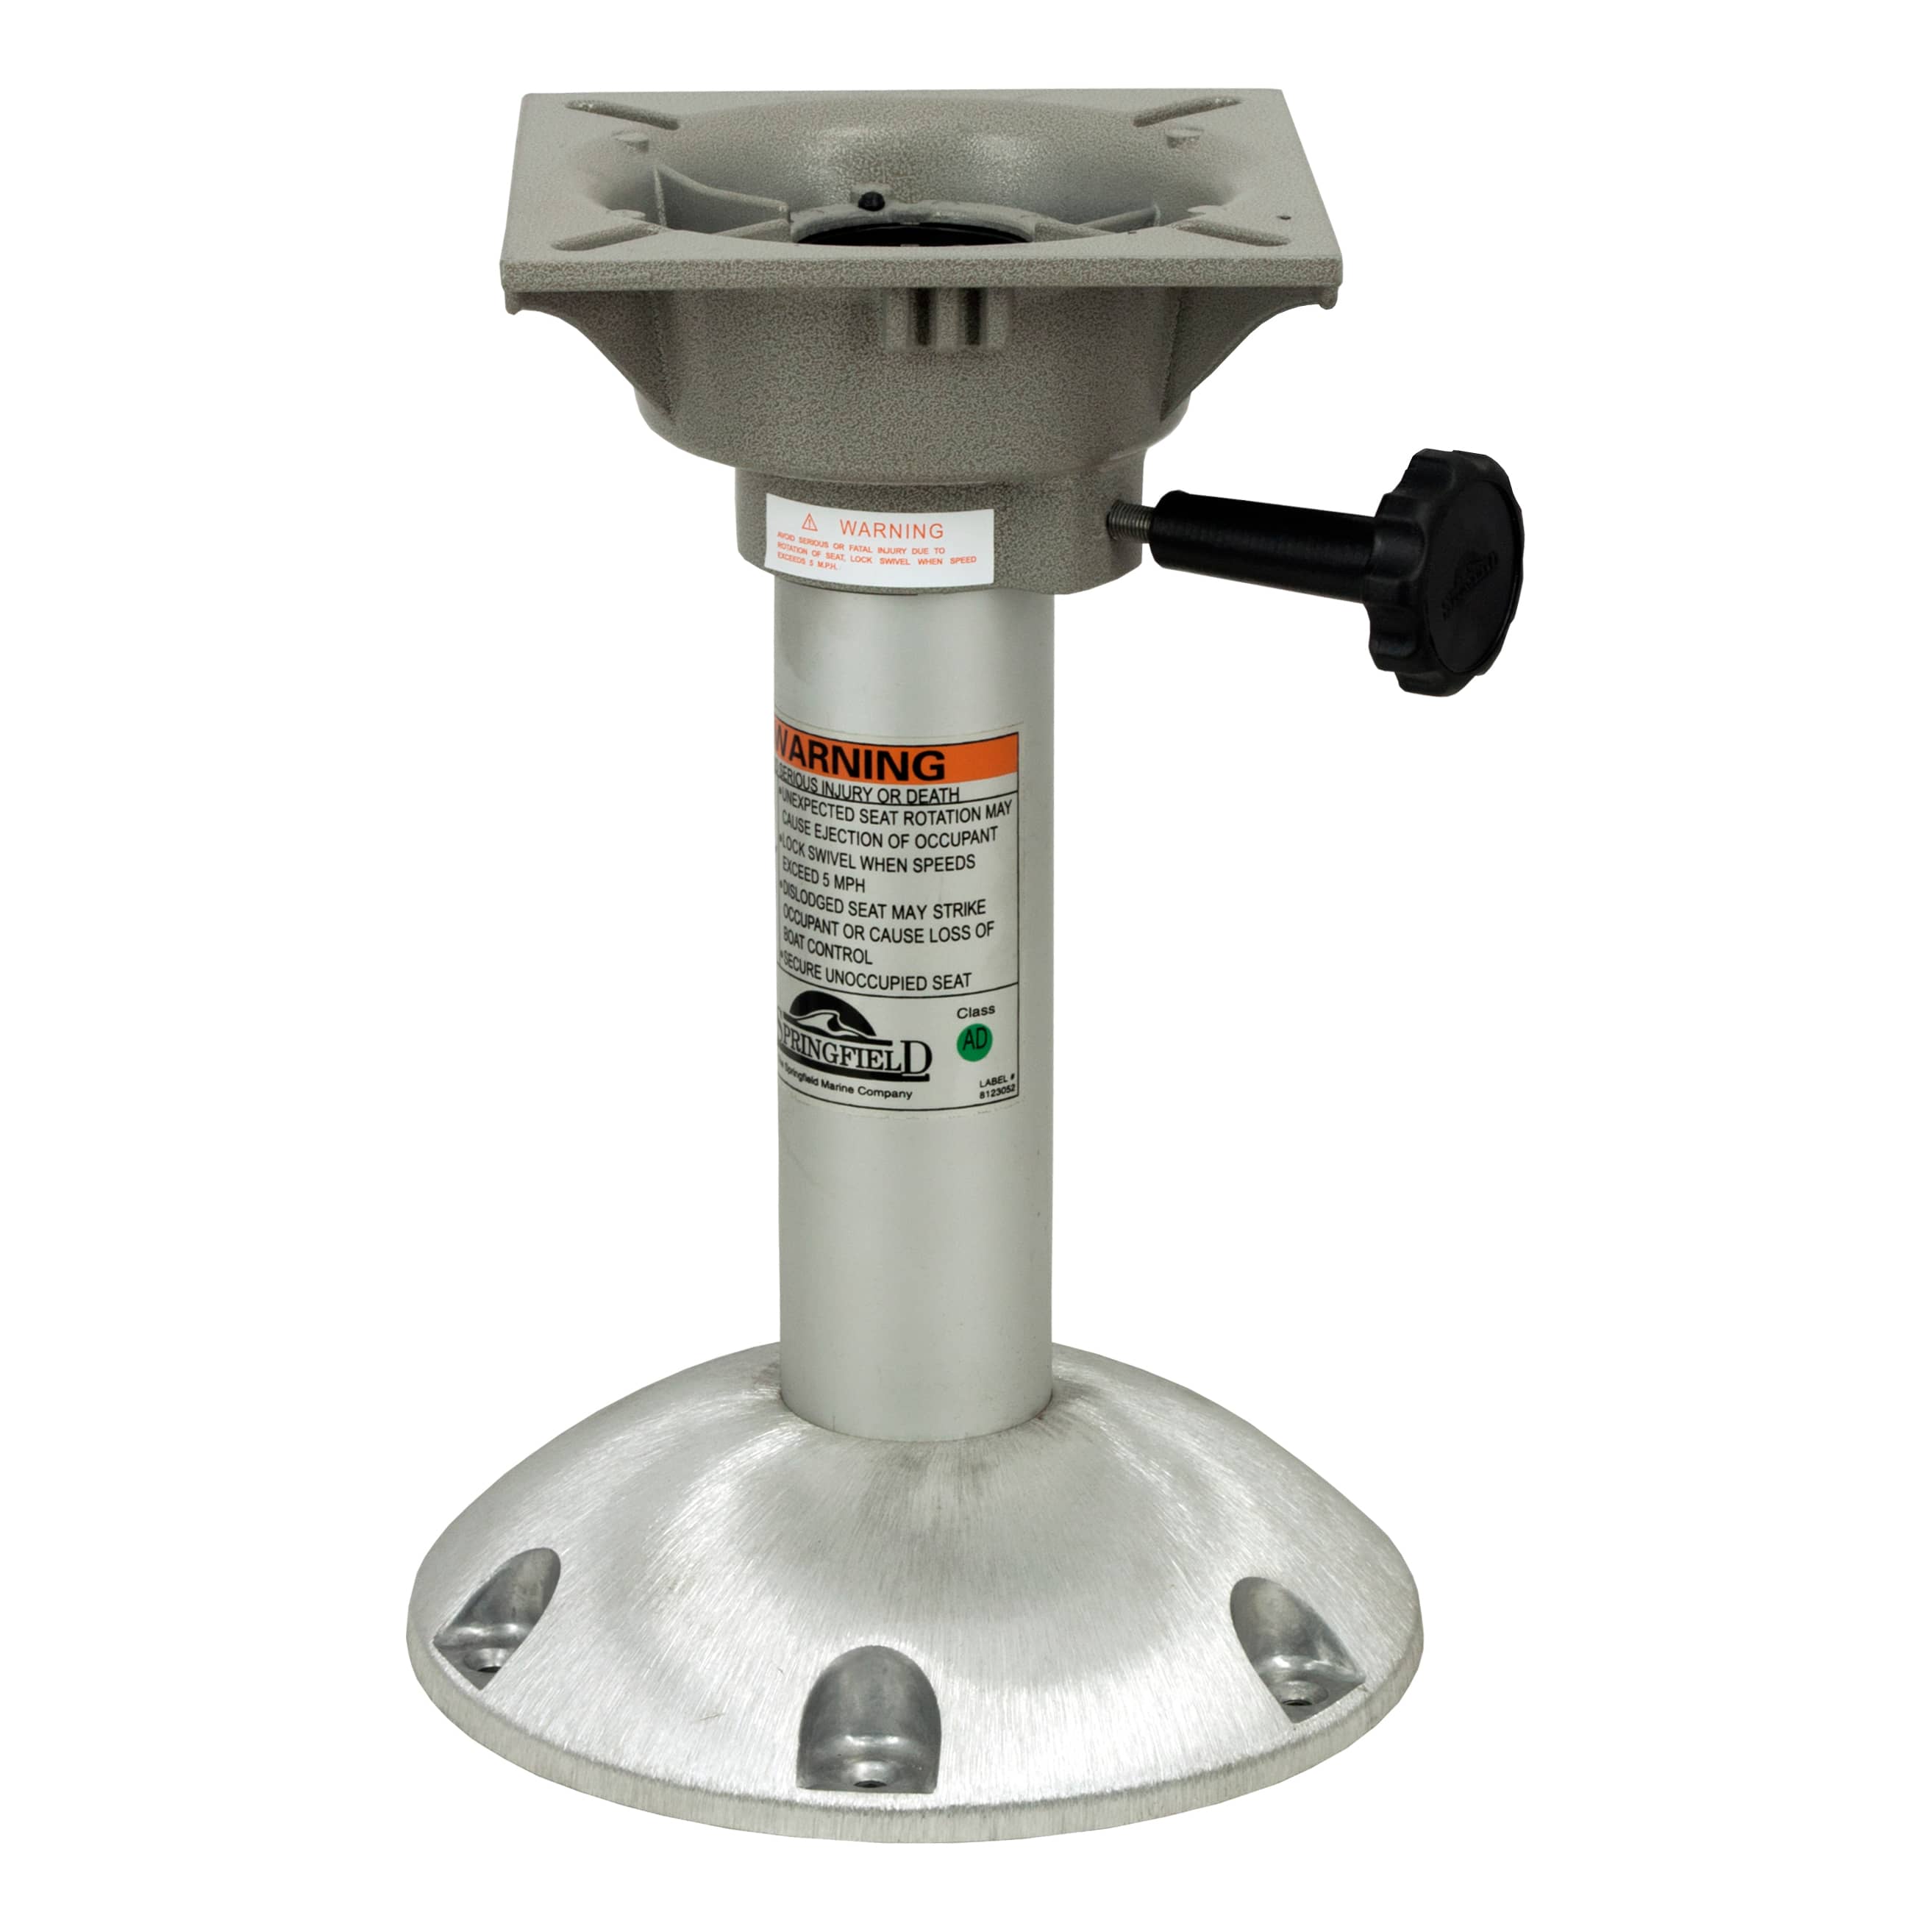 Boat Fixed Seat Pedestal - Sturdy & Reliable Support